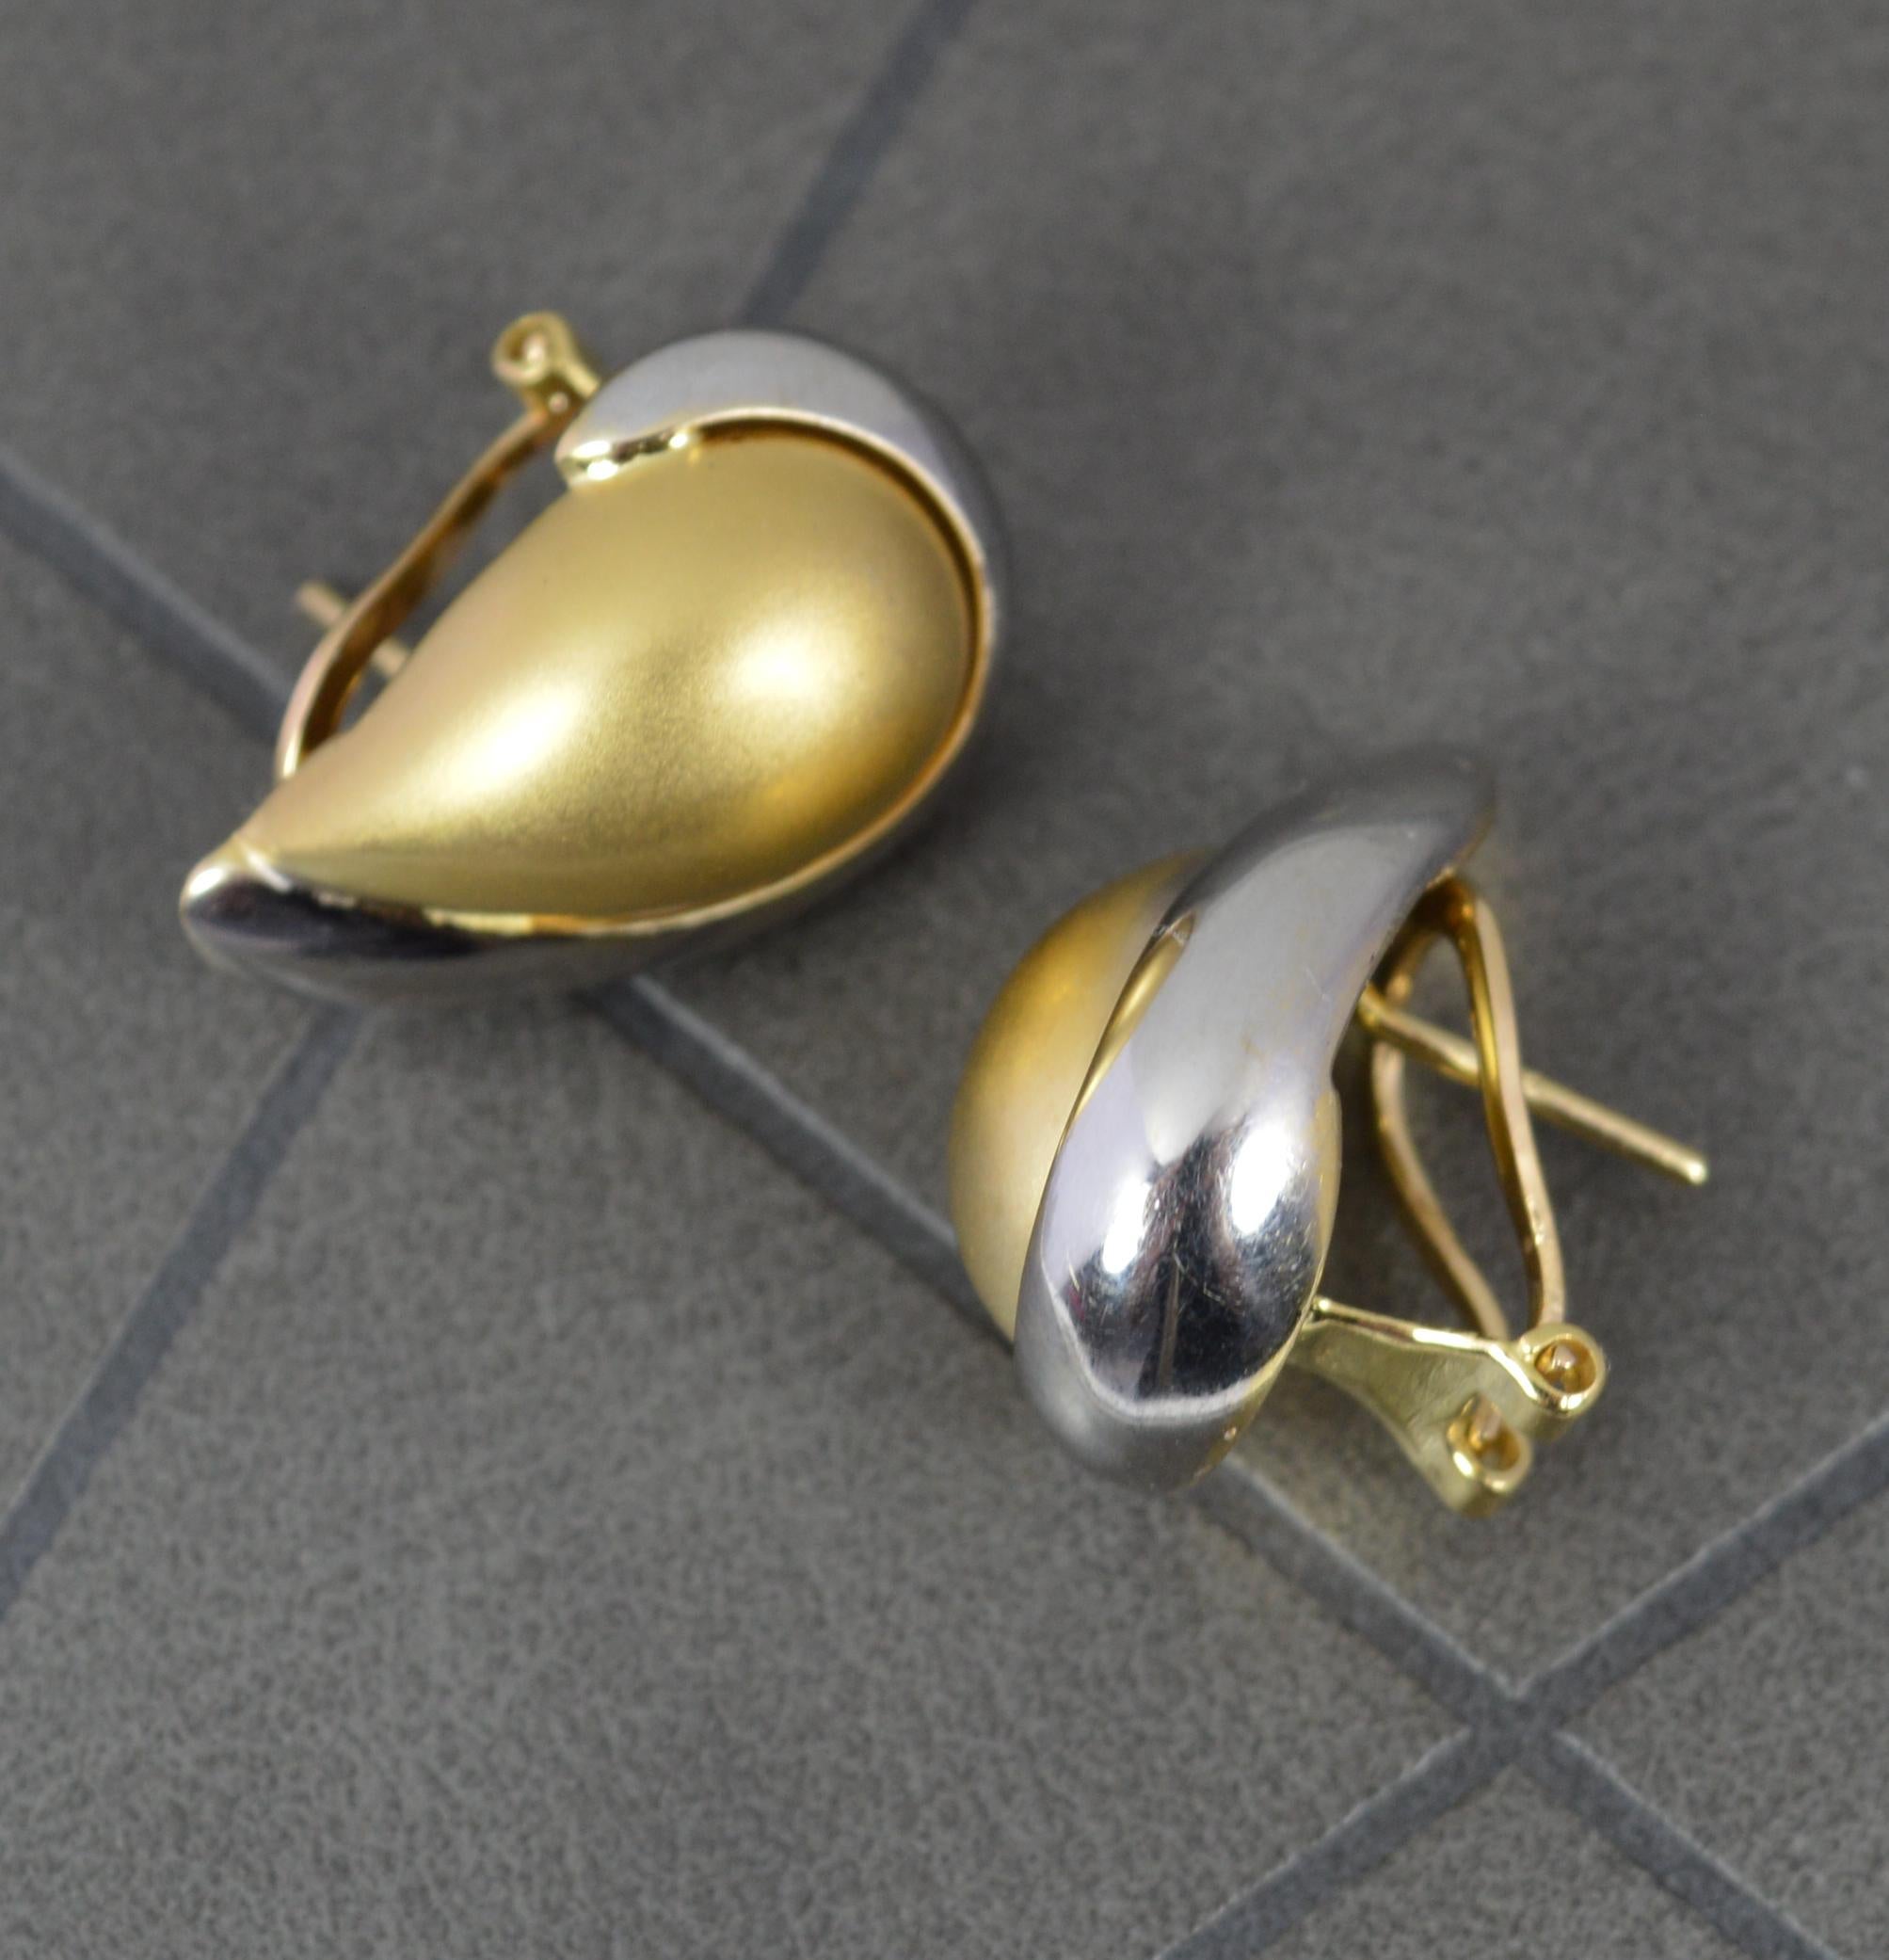 A superb pair of 18ct gold earrings.
A pear shape drop. Centre piece is a brushed finish yellow colour with a plain, polished white gold rim.
14mm x 21mm clusters approx.

CONDITION ; Very good. Crisp design. Issue free. Good omega backs. Please